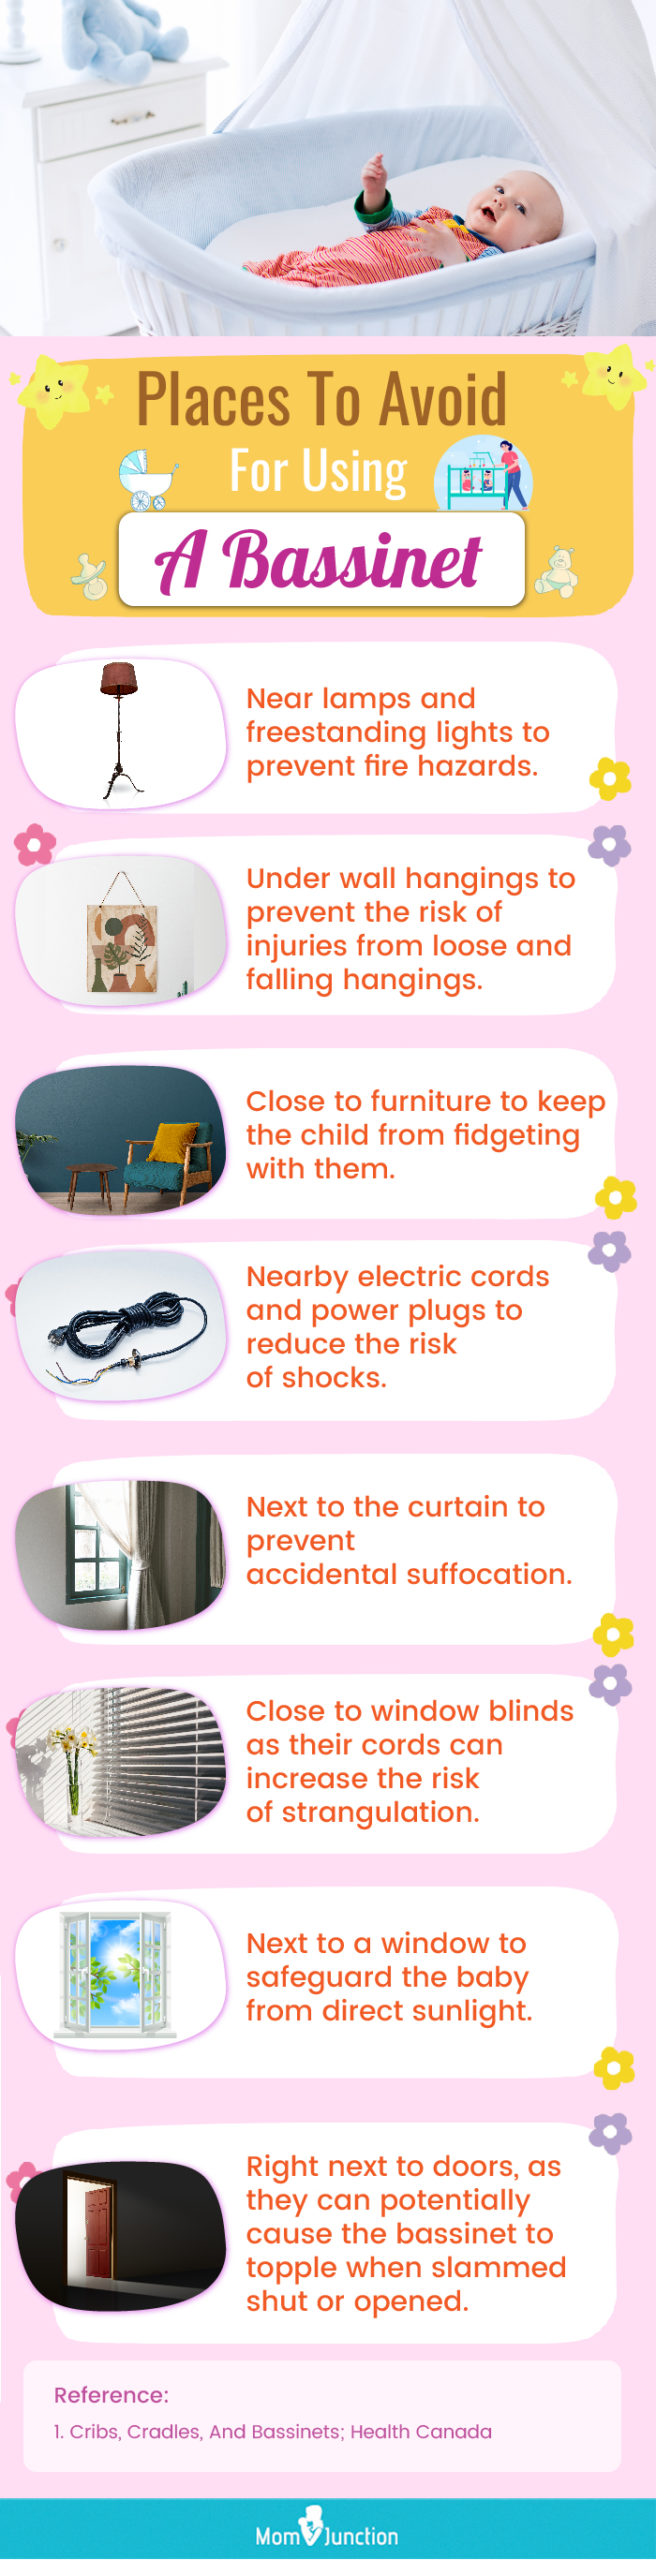 Places To Avoid For Using A Bassinet (infographic)